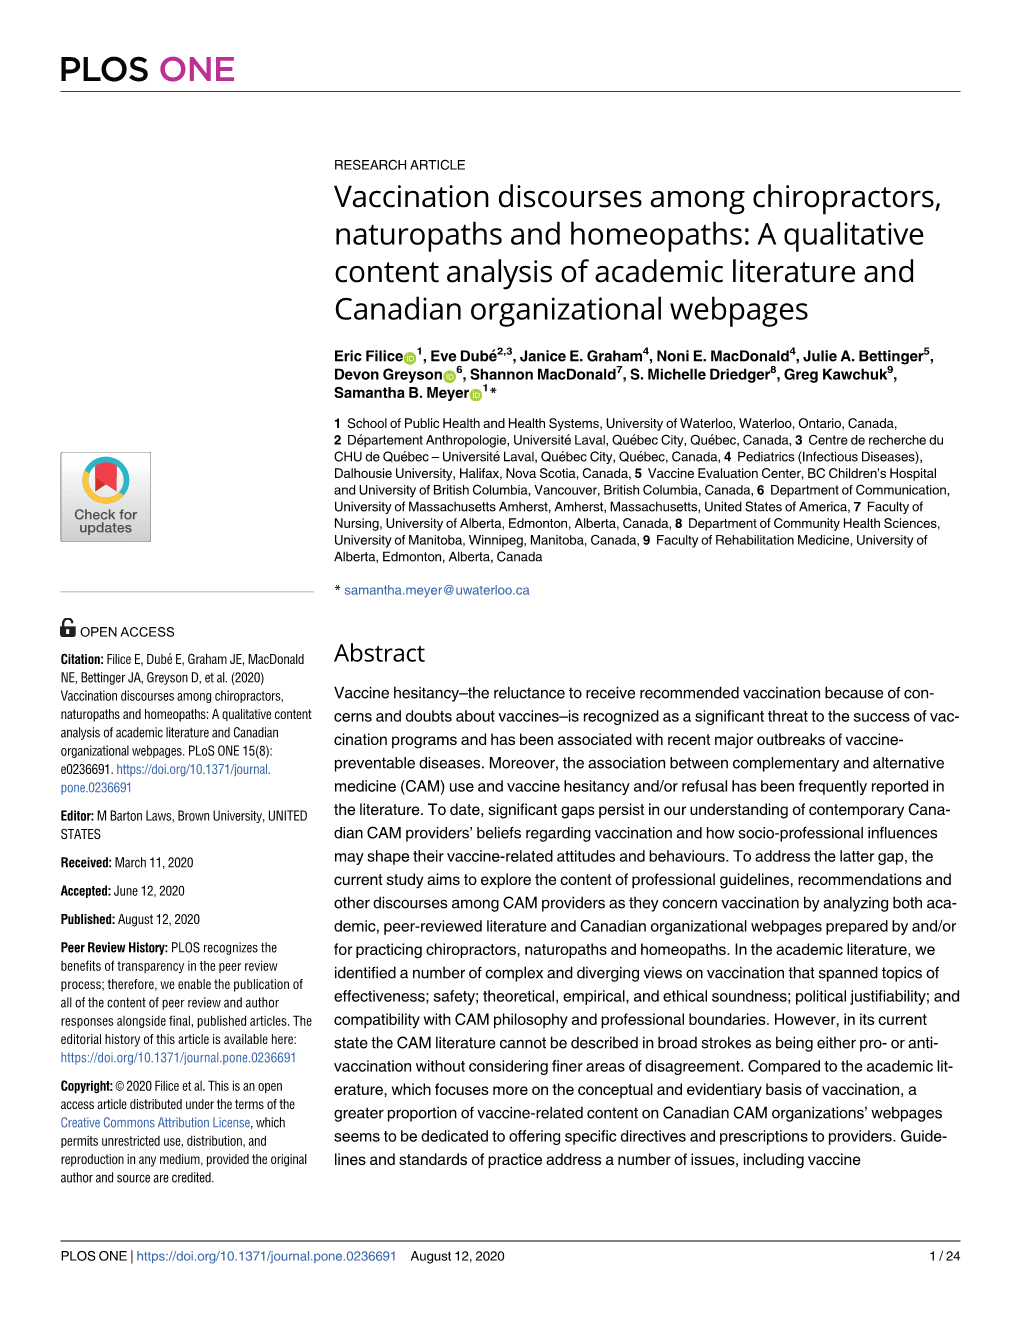 Vaccination Discourses Among Chiropractors, Naturopaths and Homeopaths: a Qualitative Content Analysis of Academic Literature and Canadian Organizational Webpages